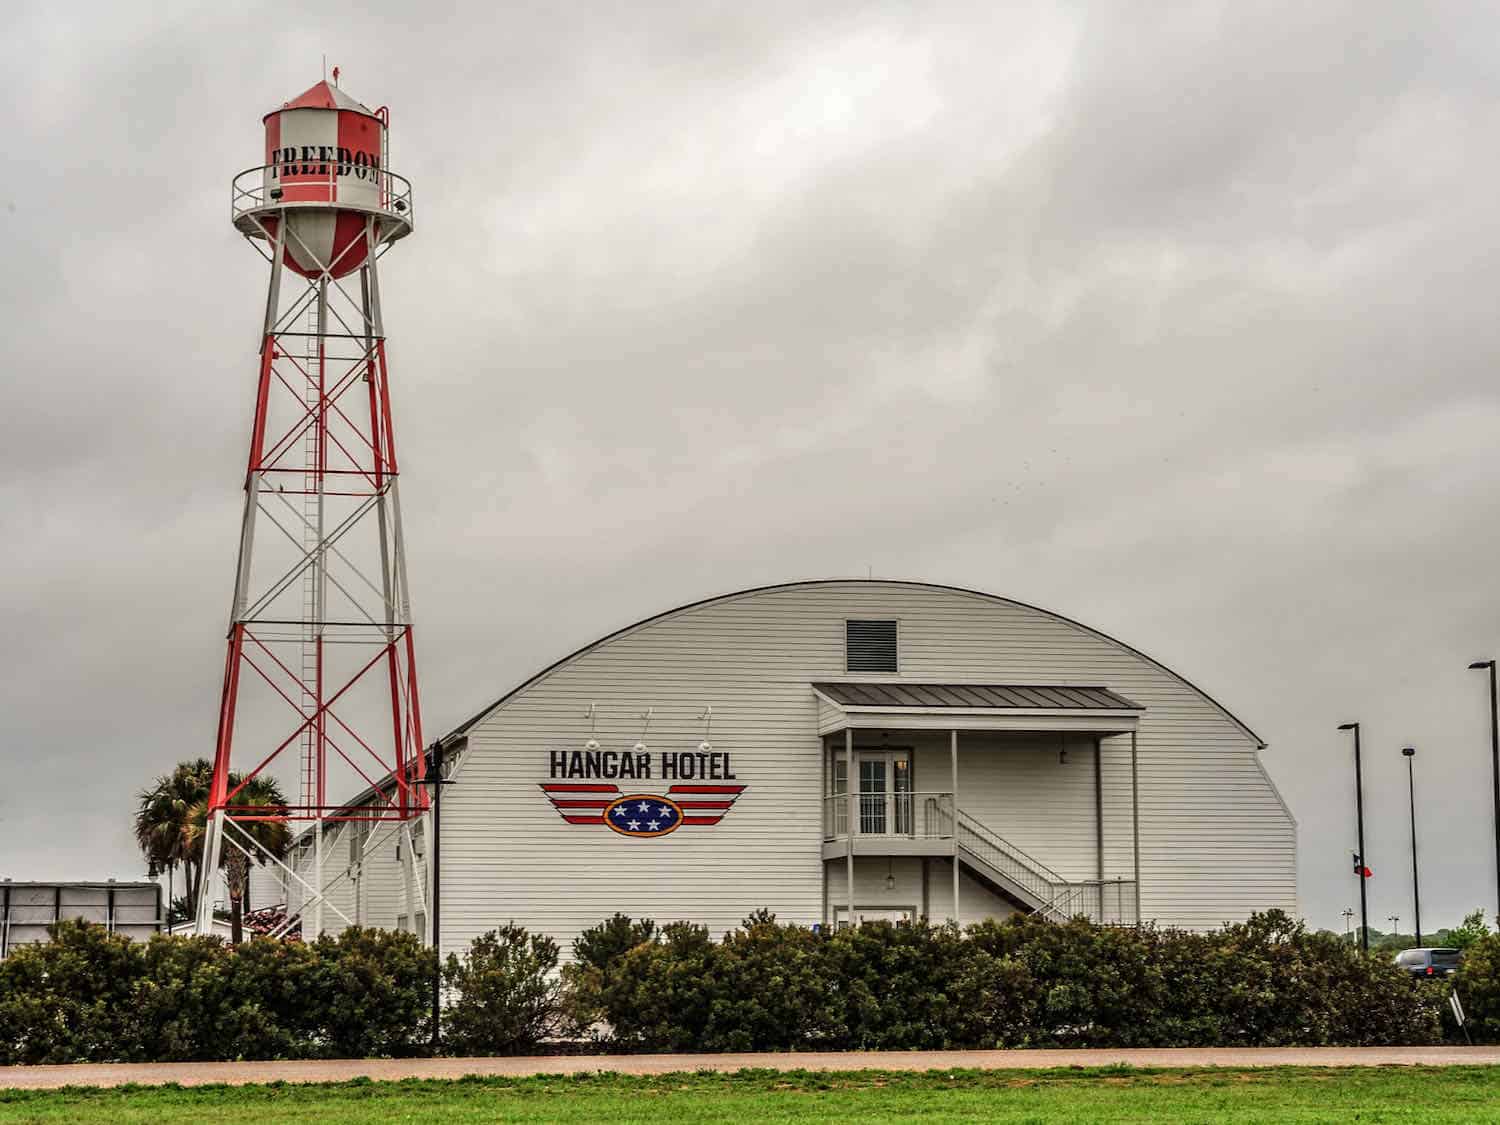 white hangar building with Hanger Hotel on the front in Fredericksburg, Texas.